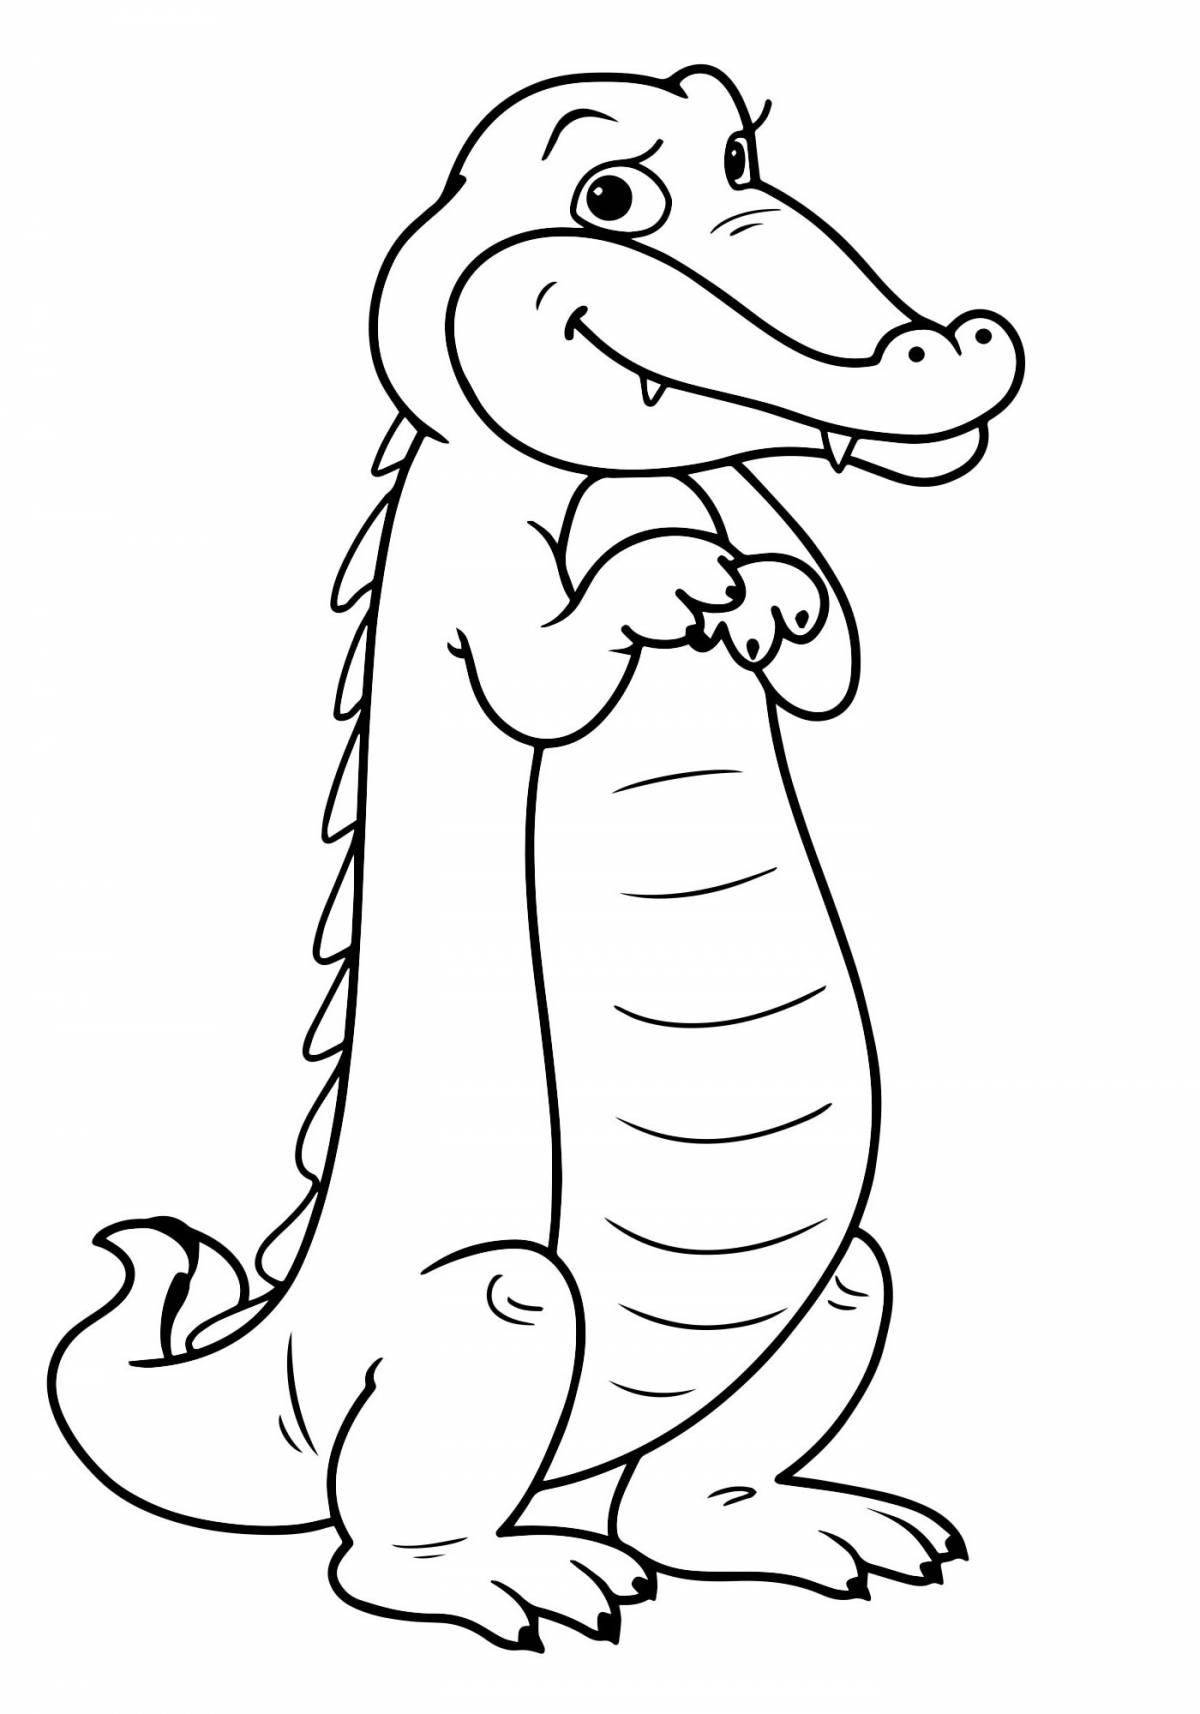 Cute crocodile coloring book for 3-4 year olds